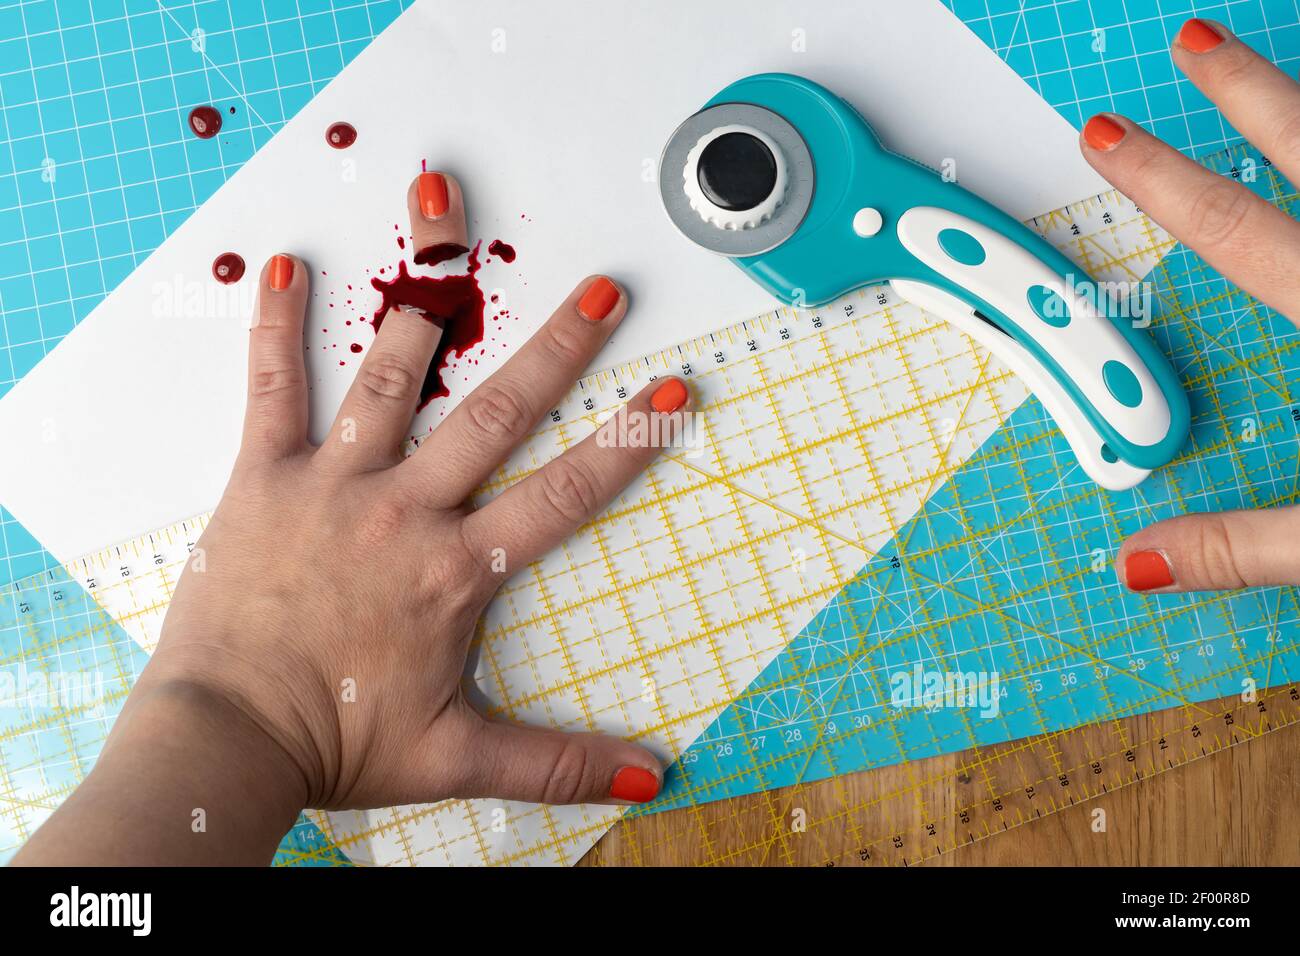 A woman with orange nail polish chopped her finger with a rotary cutter while using a bright blue cutting mat and a ruler Stock Photo